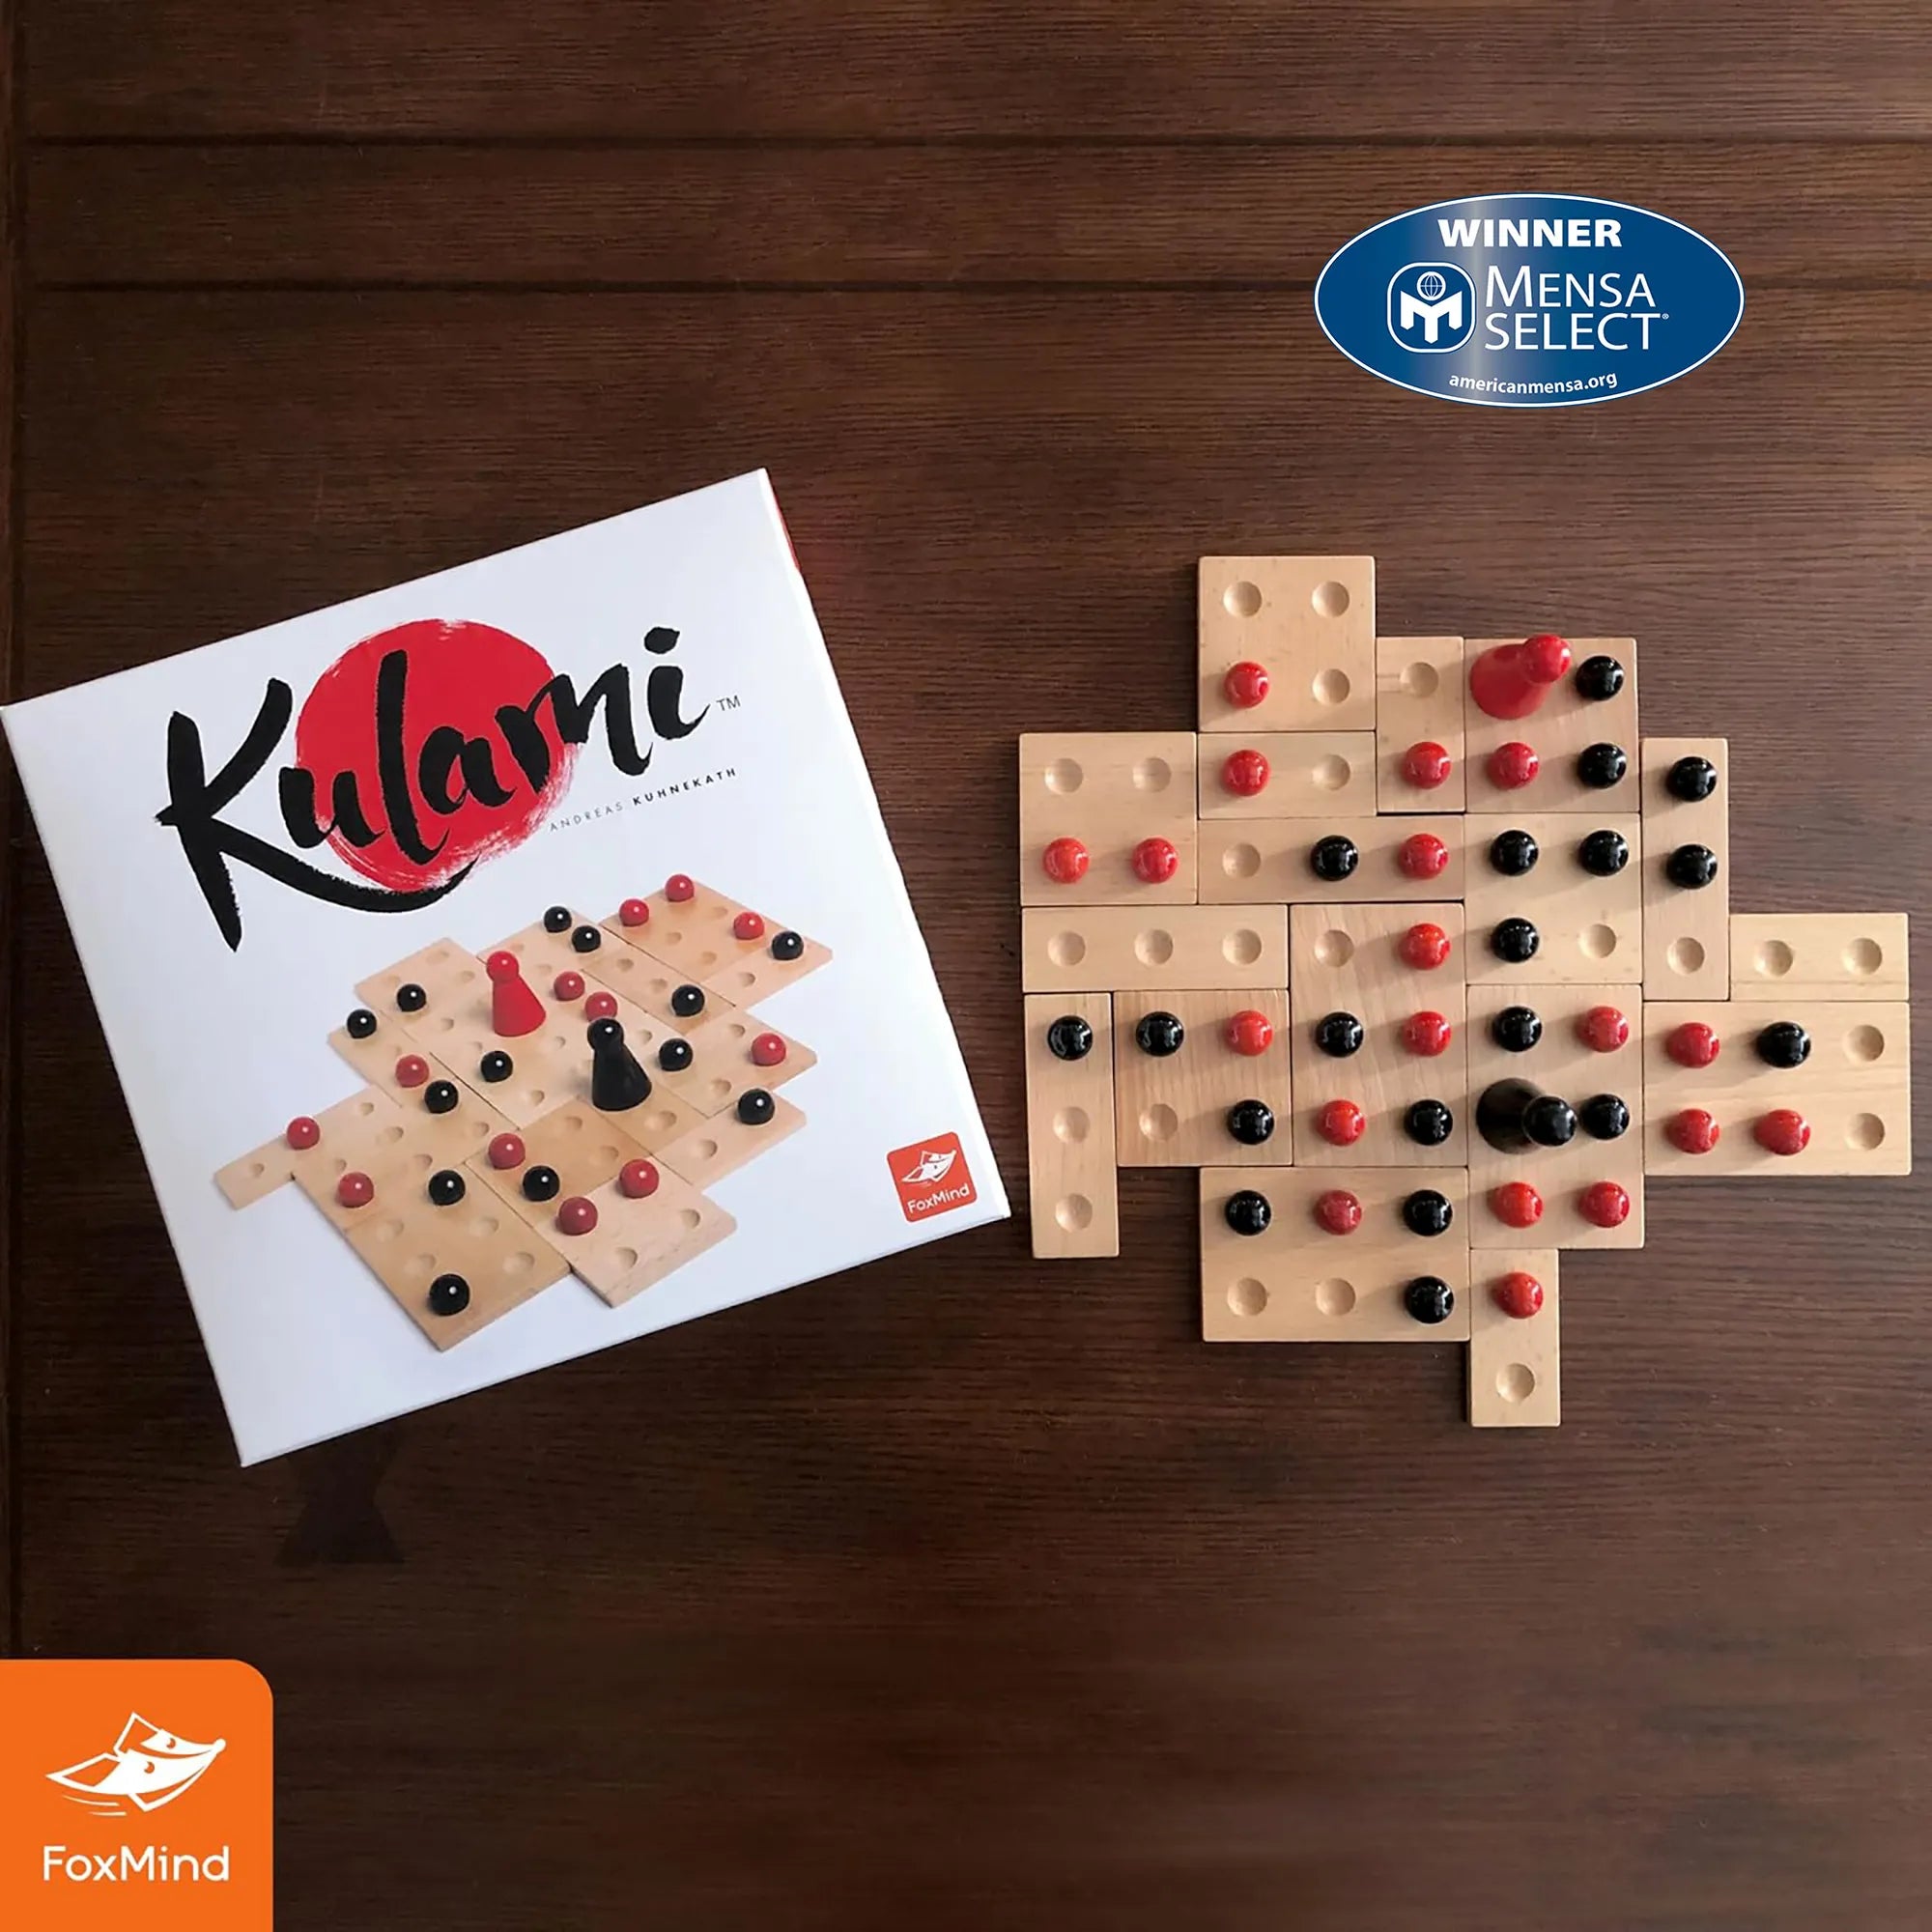 Kulami - Mensa Winning Strategy Game for Sharp Minds - Age 9+ - Brown's Hobby & Game